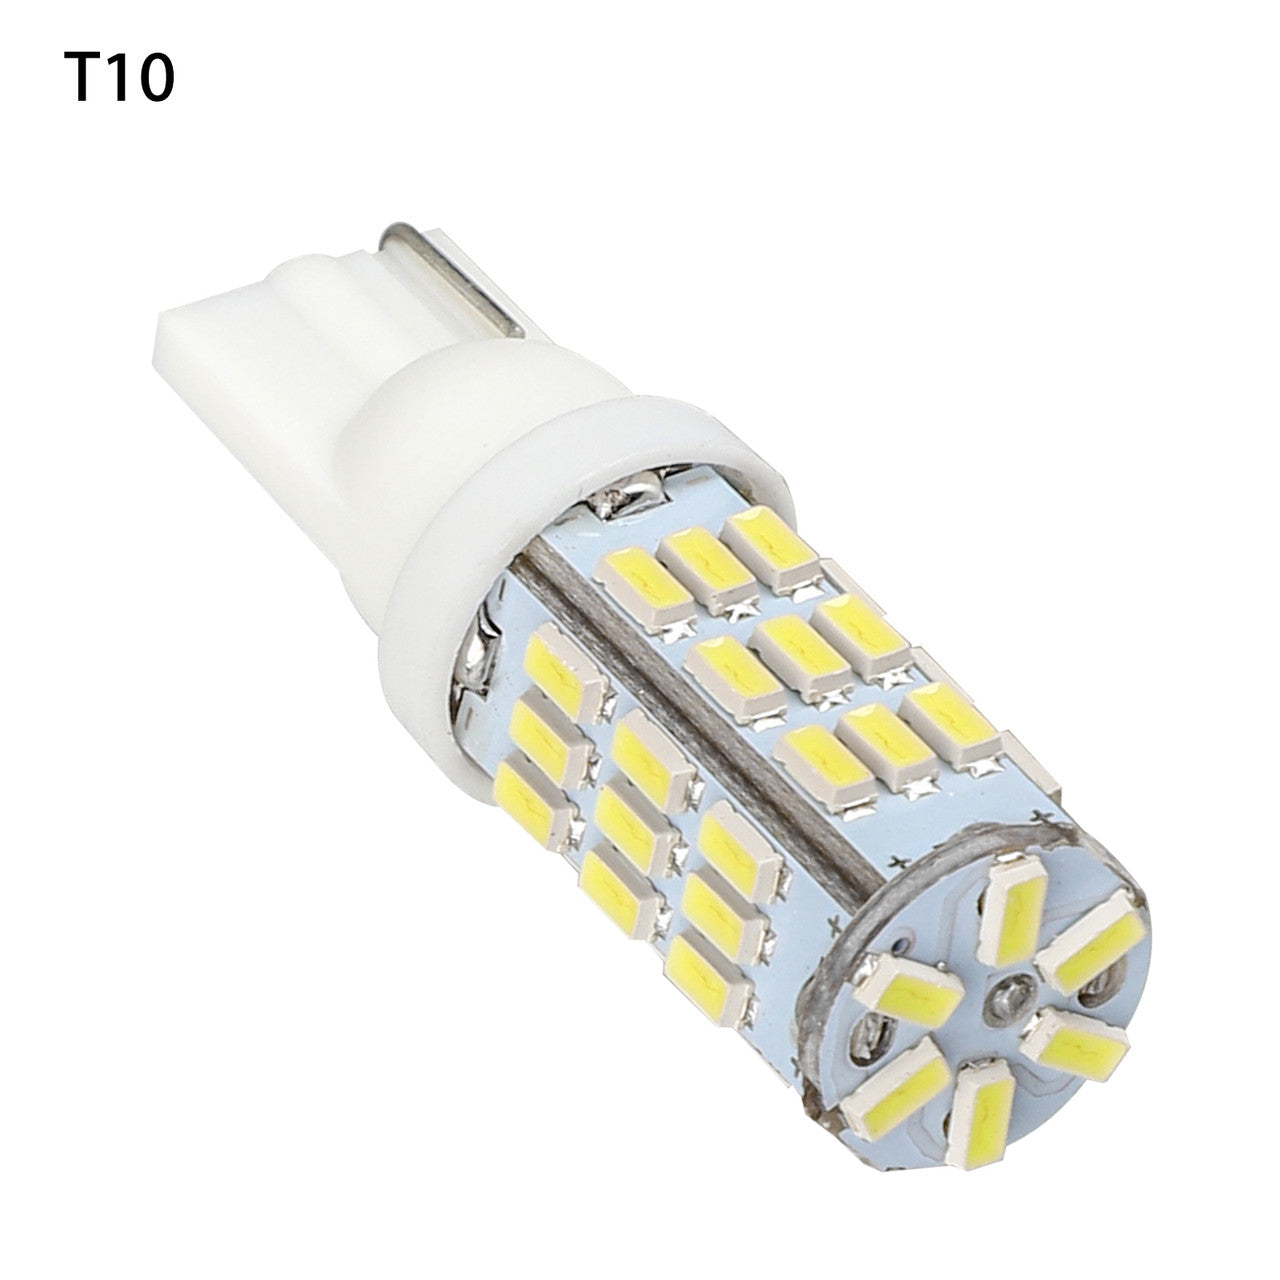 T10 194 LED Light Bulb 42-SMD Super Bright 168 2825 W5W LED Replacement 12V Bulbs For Car Dome Map Door License Plate RV Trailer Backup Reverse Lights, Pure White 6500K, 20Pcs